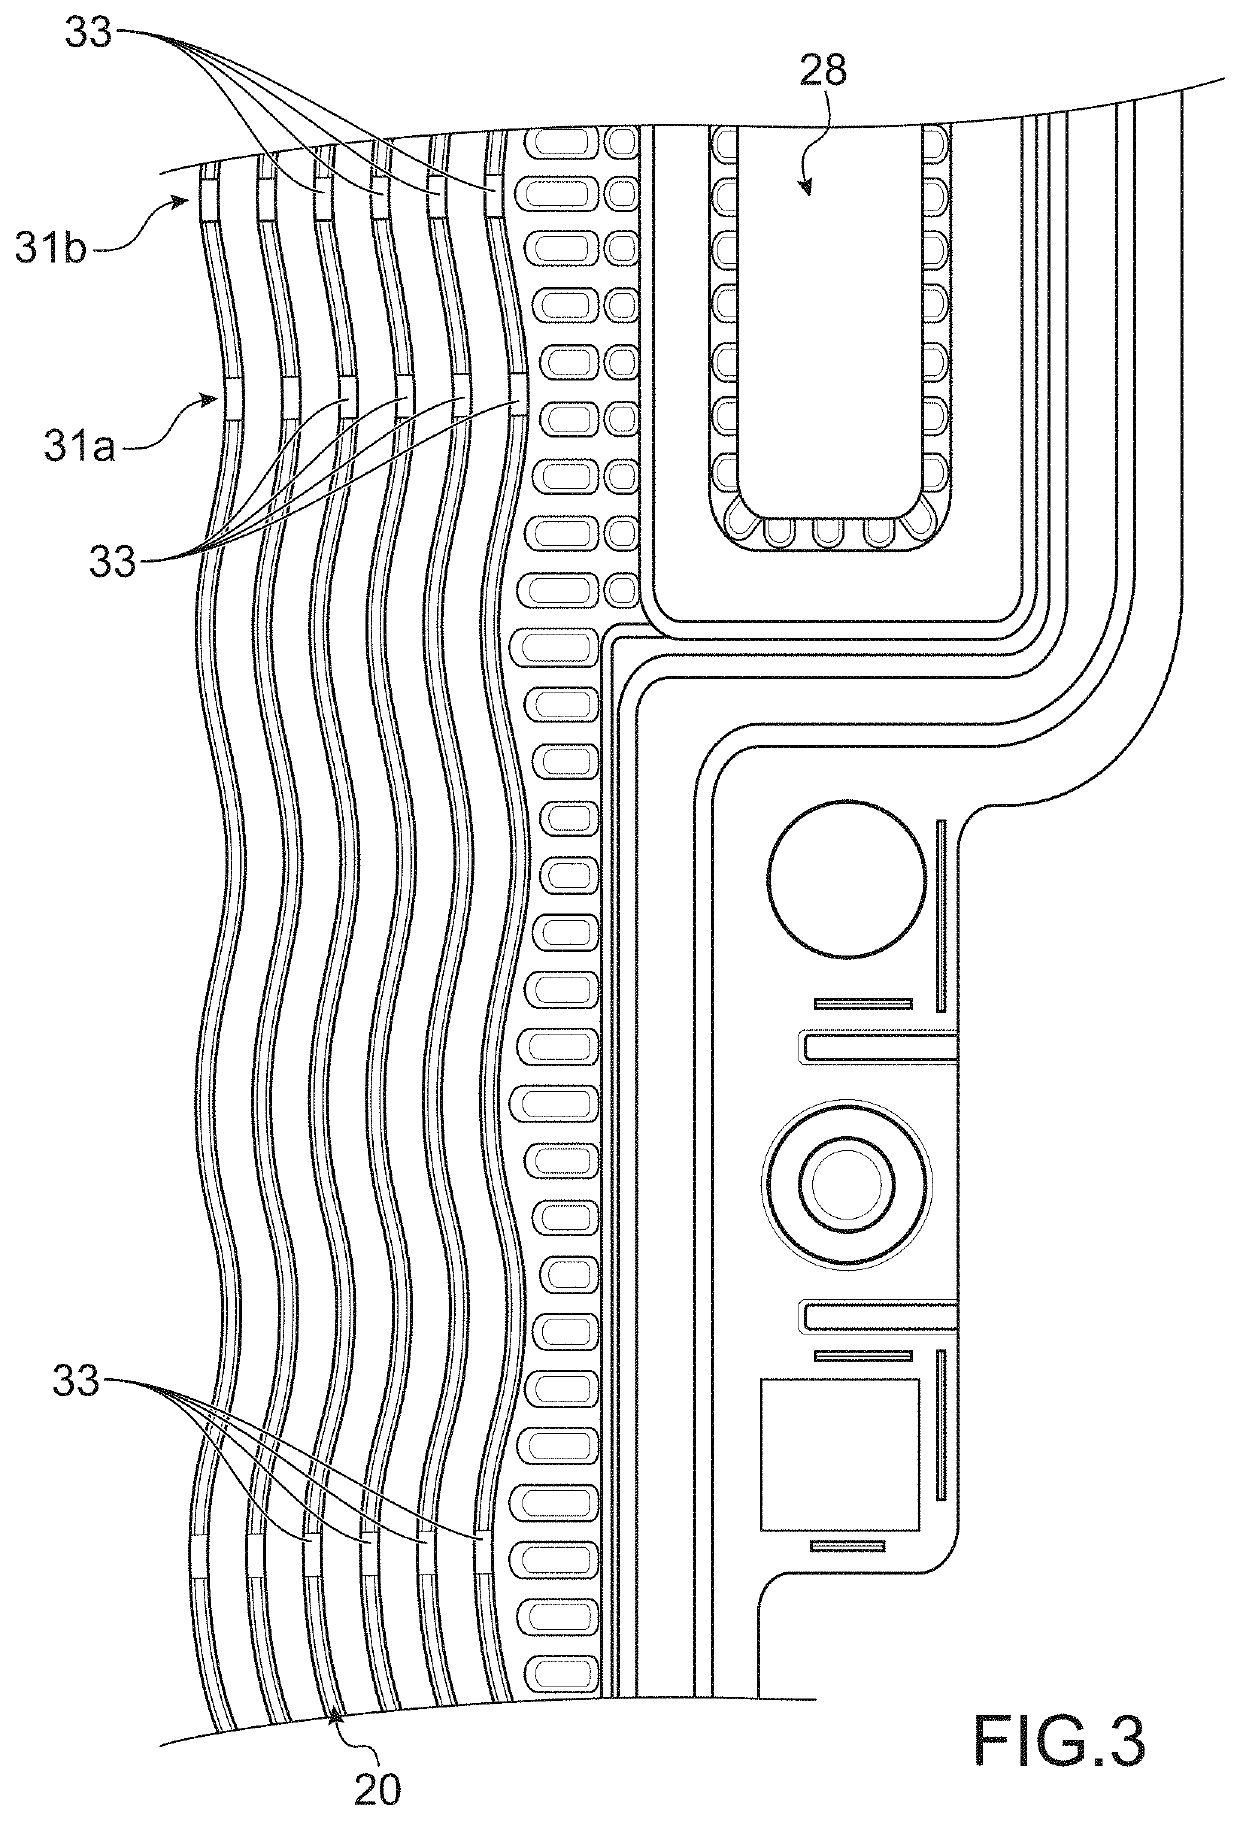 Bipolar plate with undulating channels